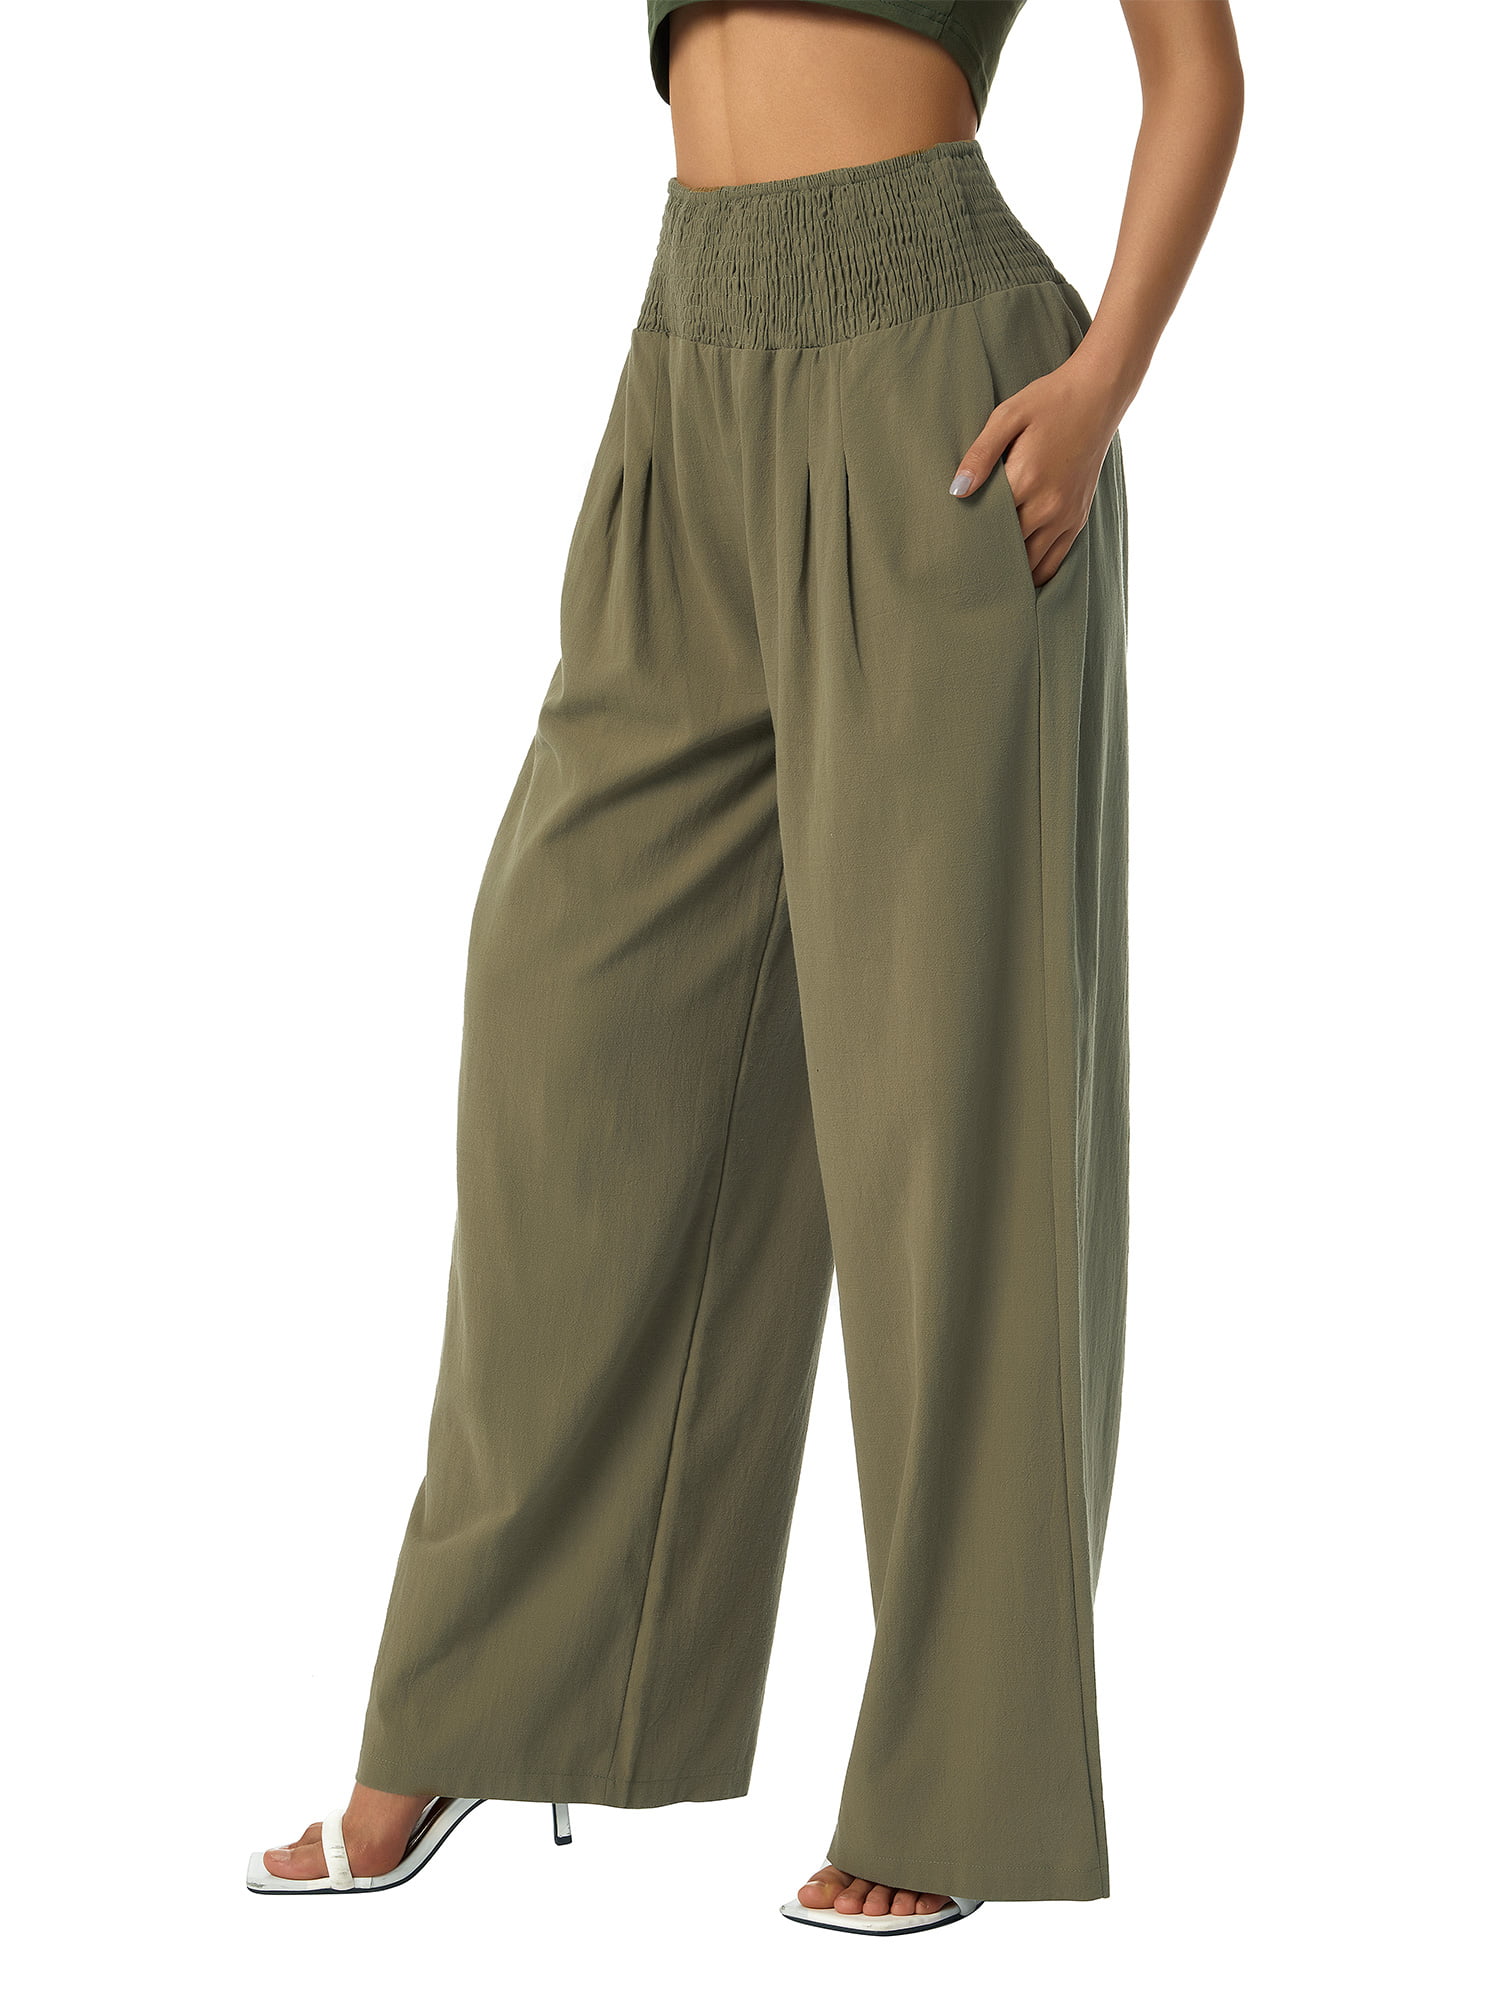 Women's Linen Palazzo Pants - Casual Loose Beach Trousers for a Fashionable  and Relaxed Vibe Blue at Amazon Women's Clothing store